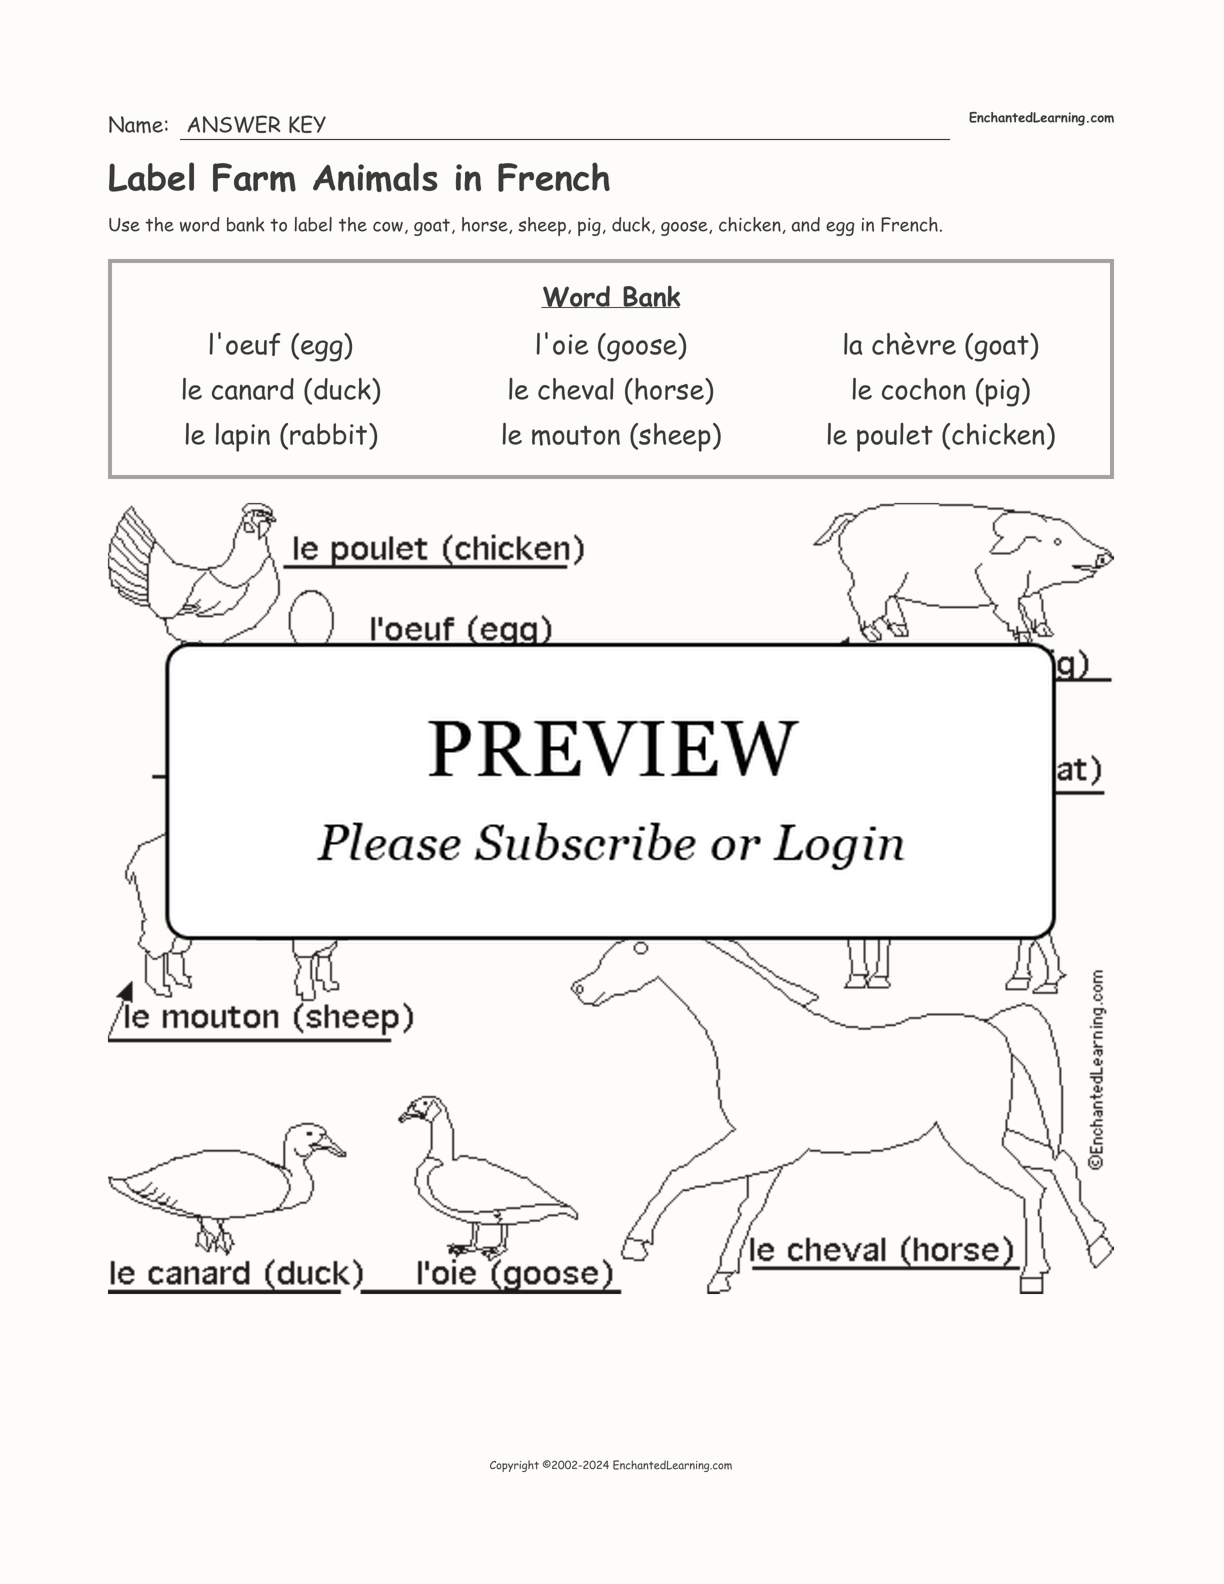 Label Farm Animals in French interactive worksheet page 2